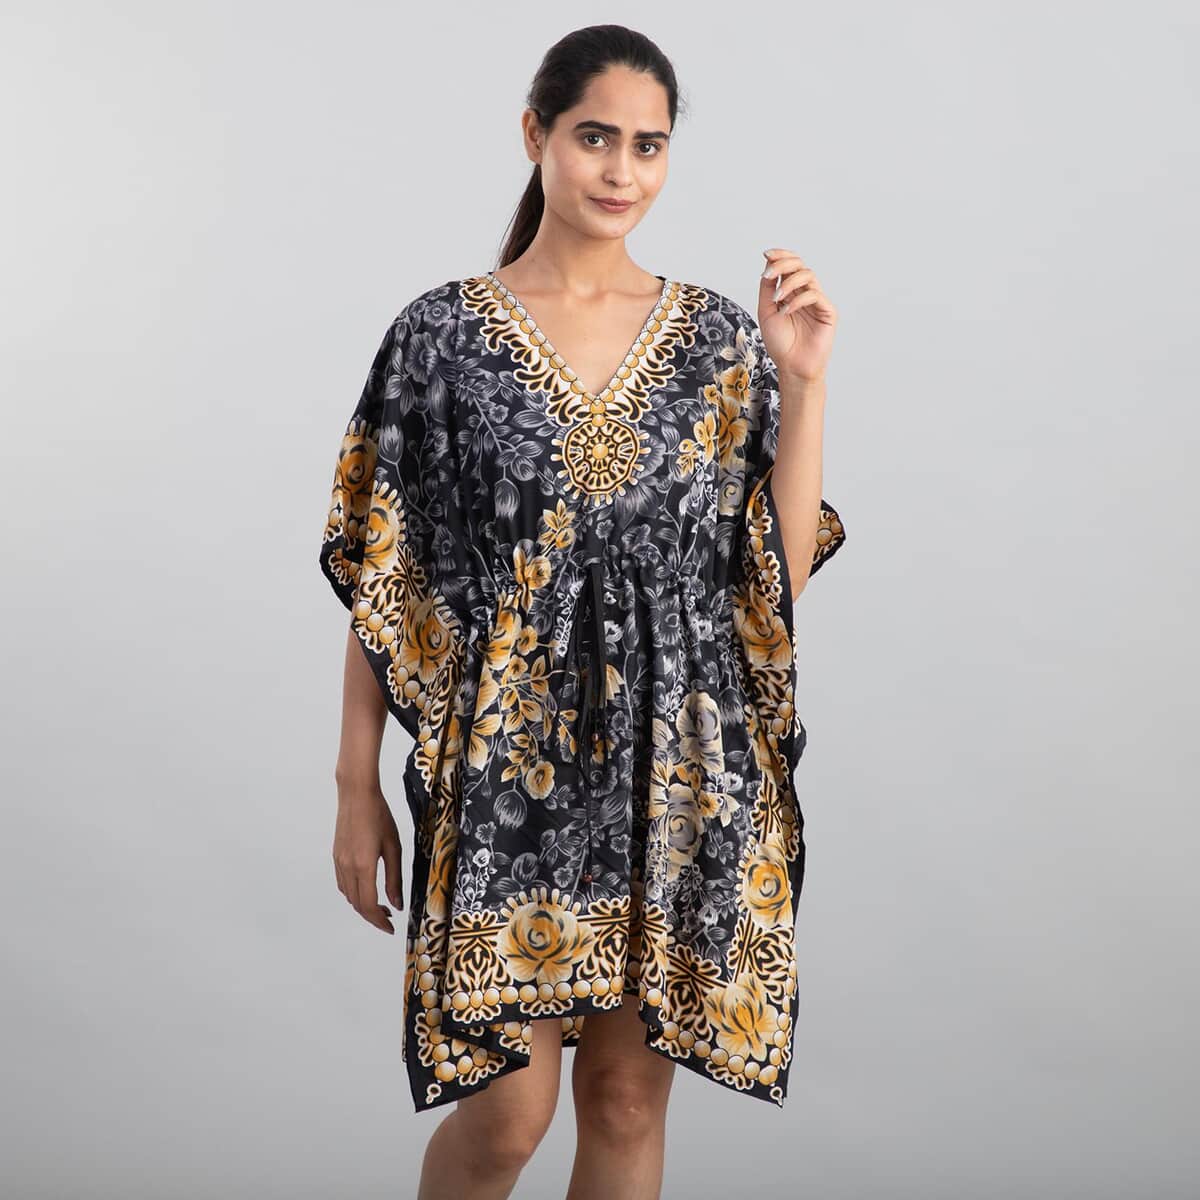 TAMSY Gray Floral Print 100% Polyester V-neck Kaftan with Pockets - One Size Fits Most (36"x41") image number 0